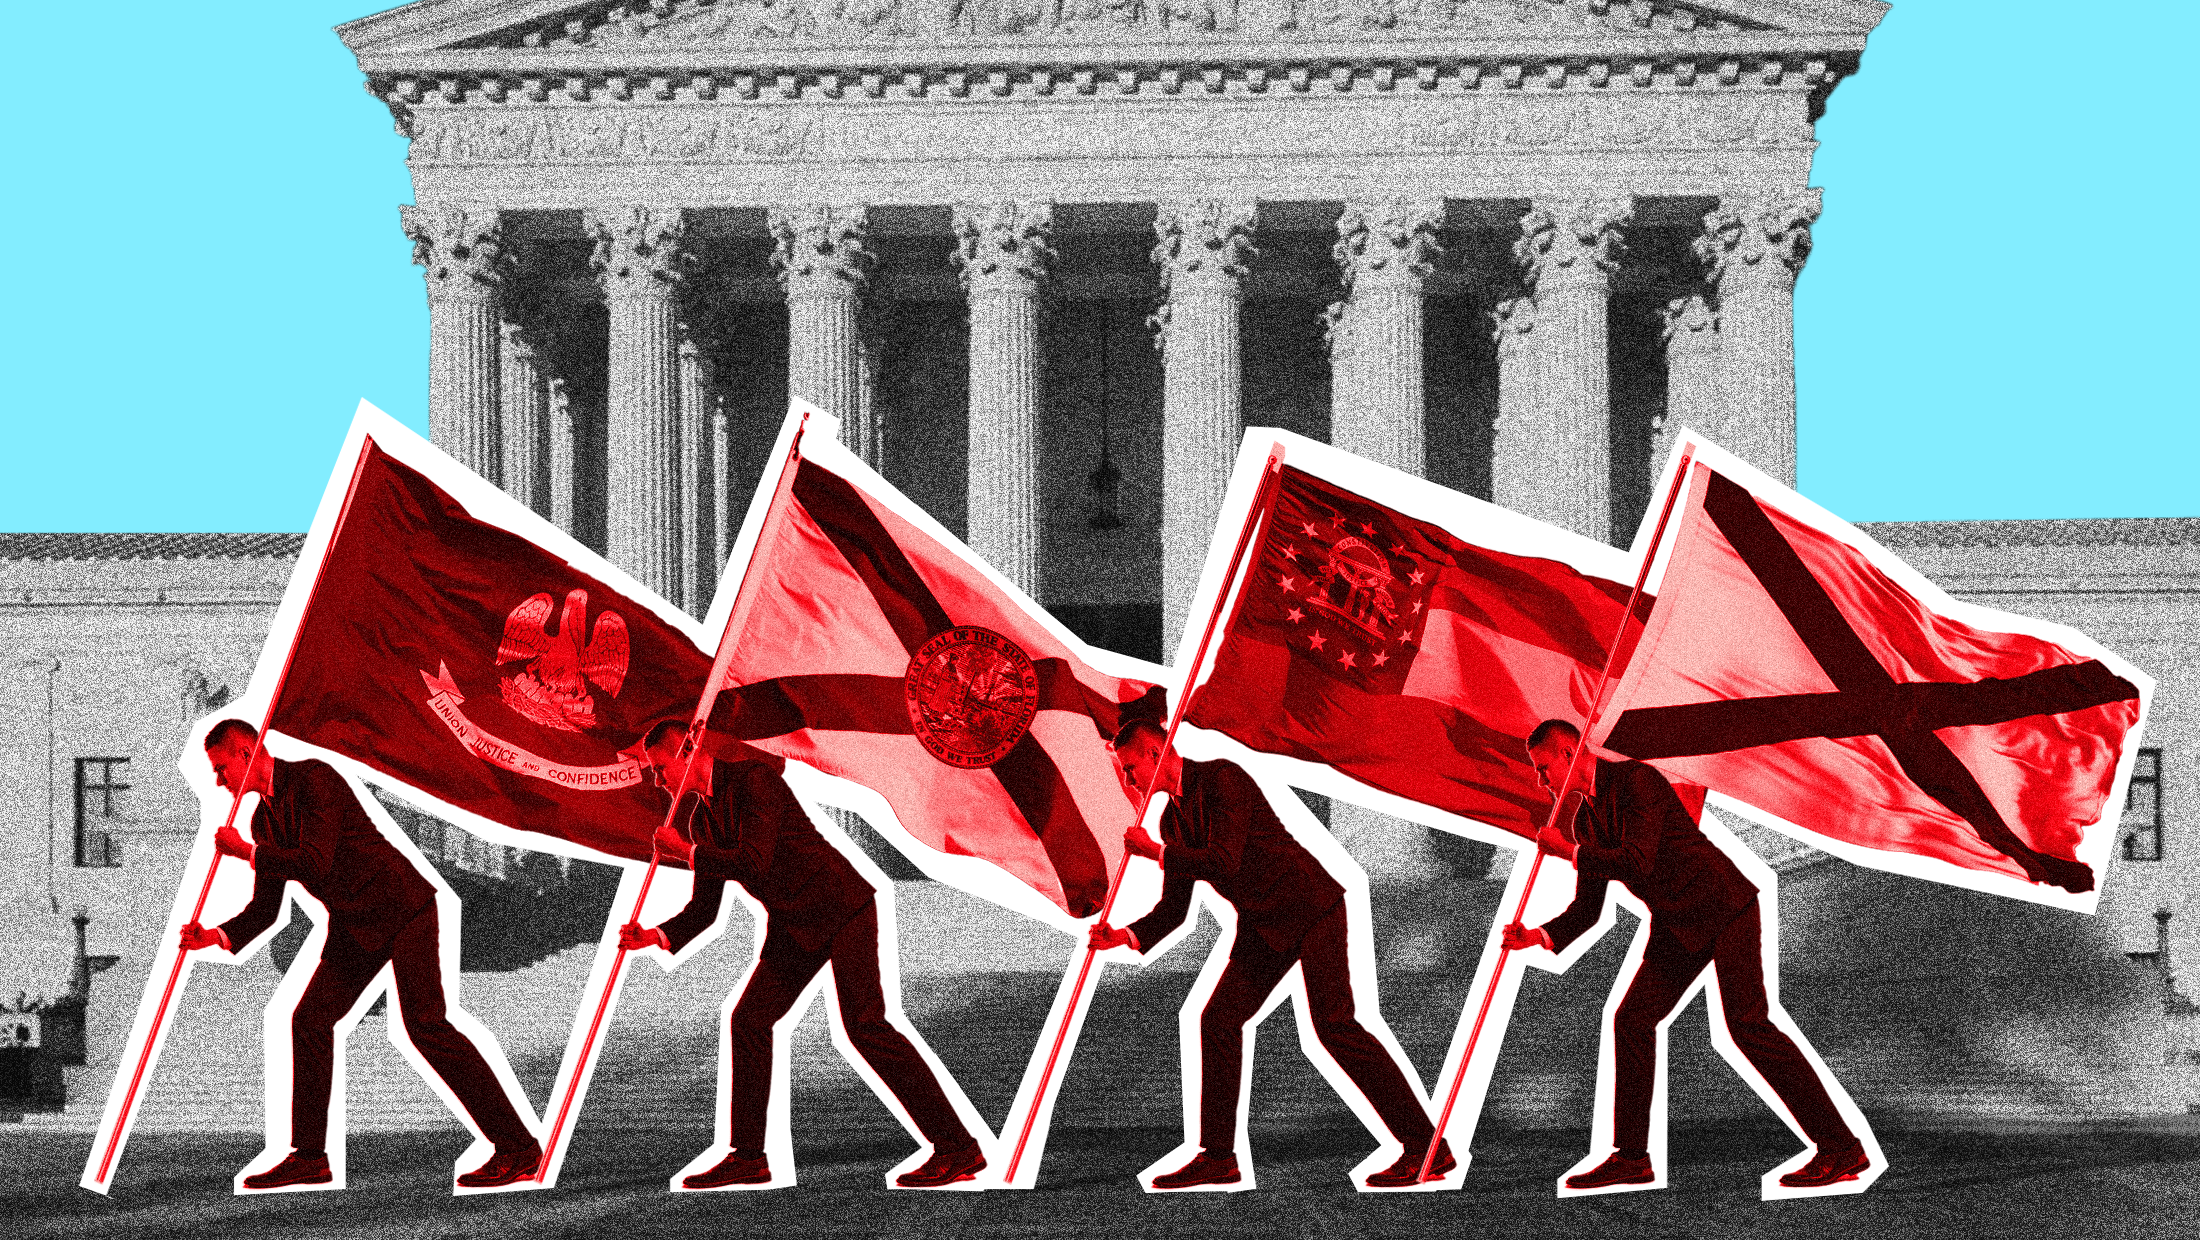 Light blue background with image of the U.S. Supreme Court and four red-toned men holding flags of the following states (from left to right): Louisiana, Florida, Georgia and Alabama.